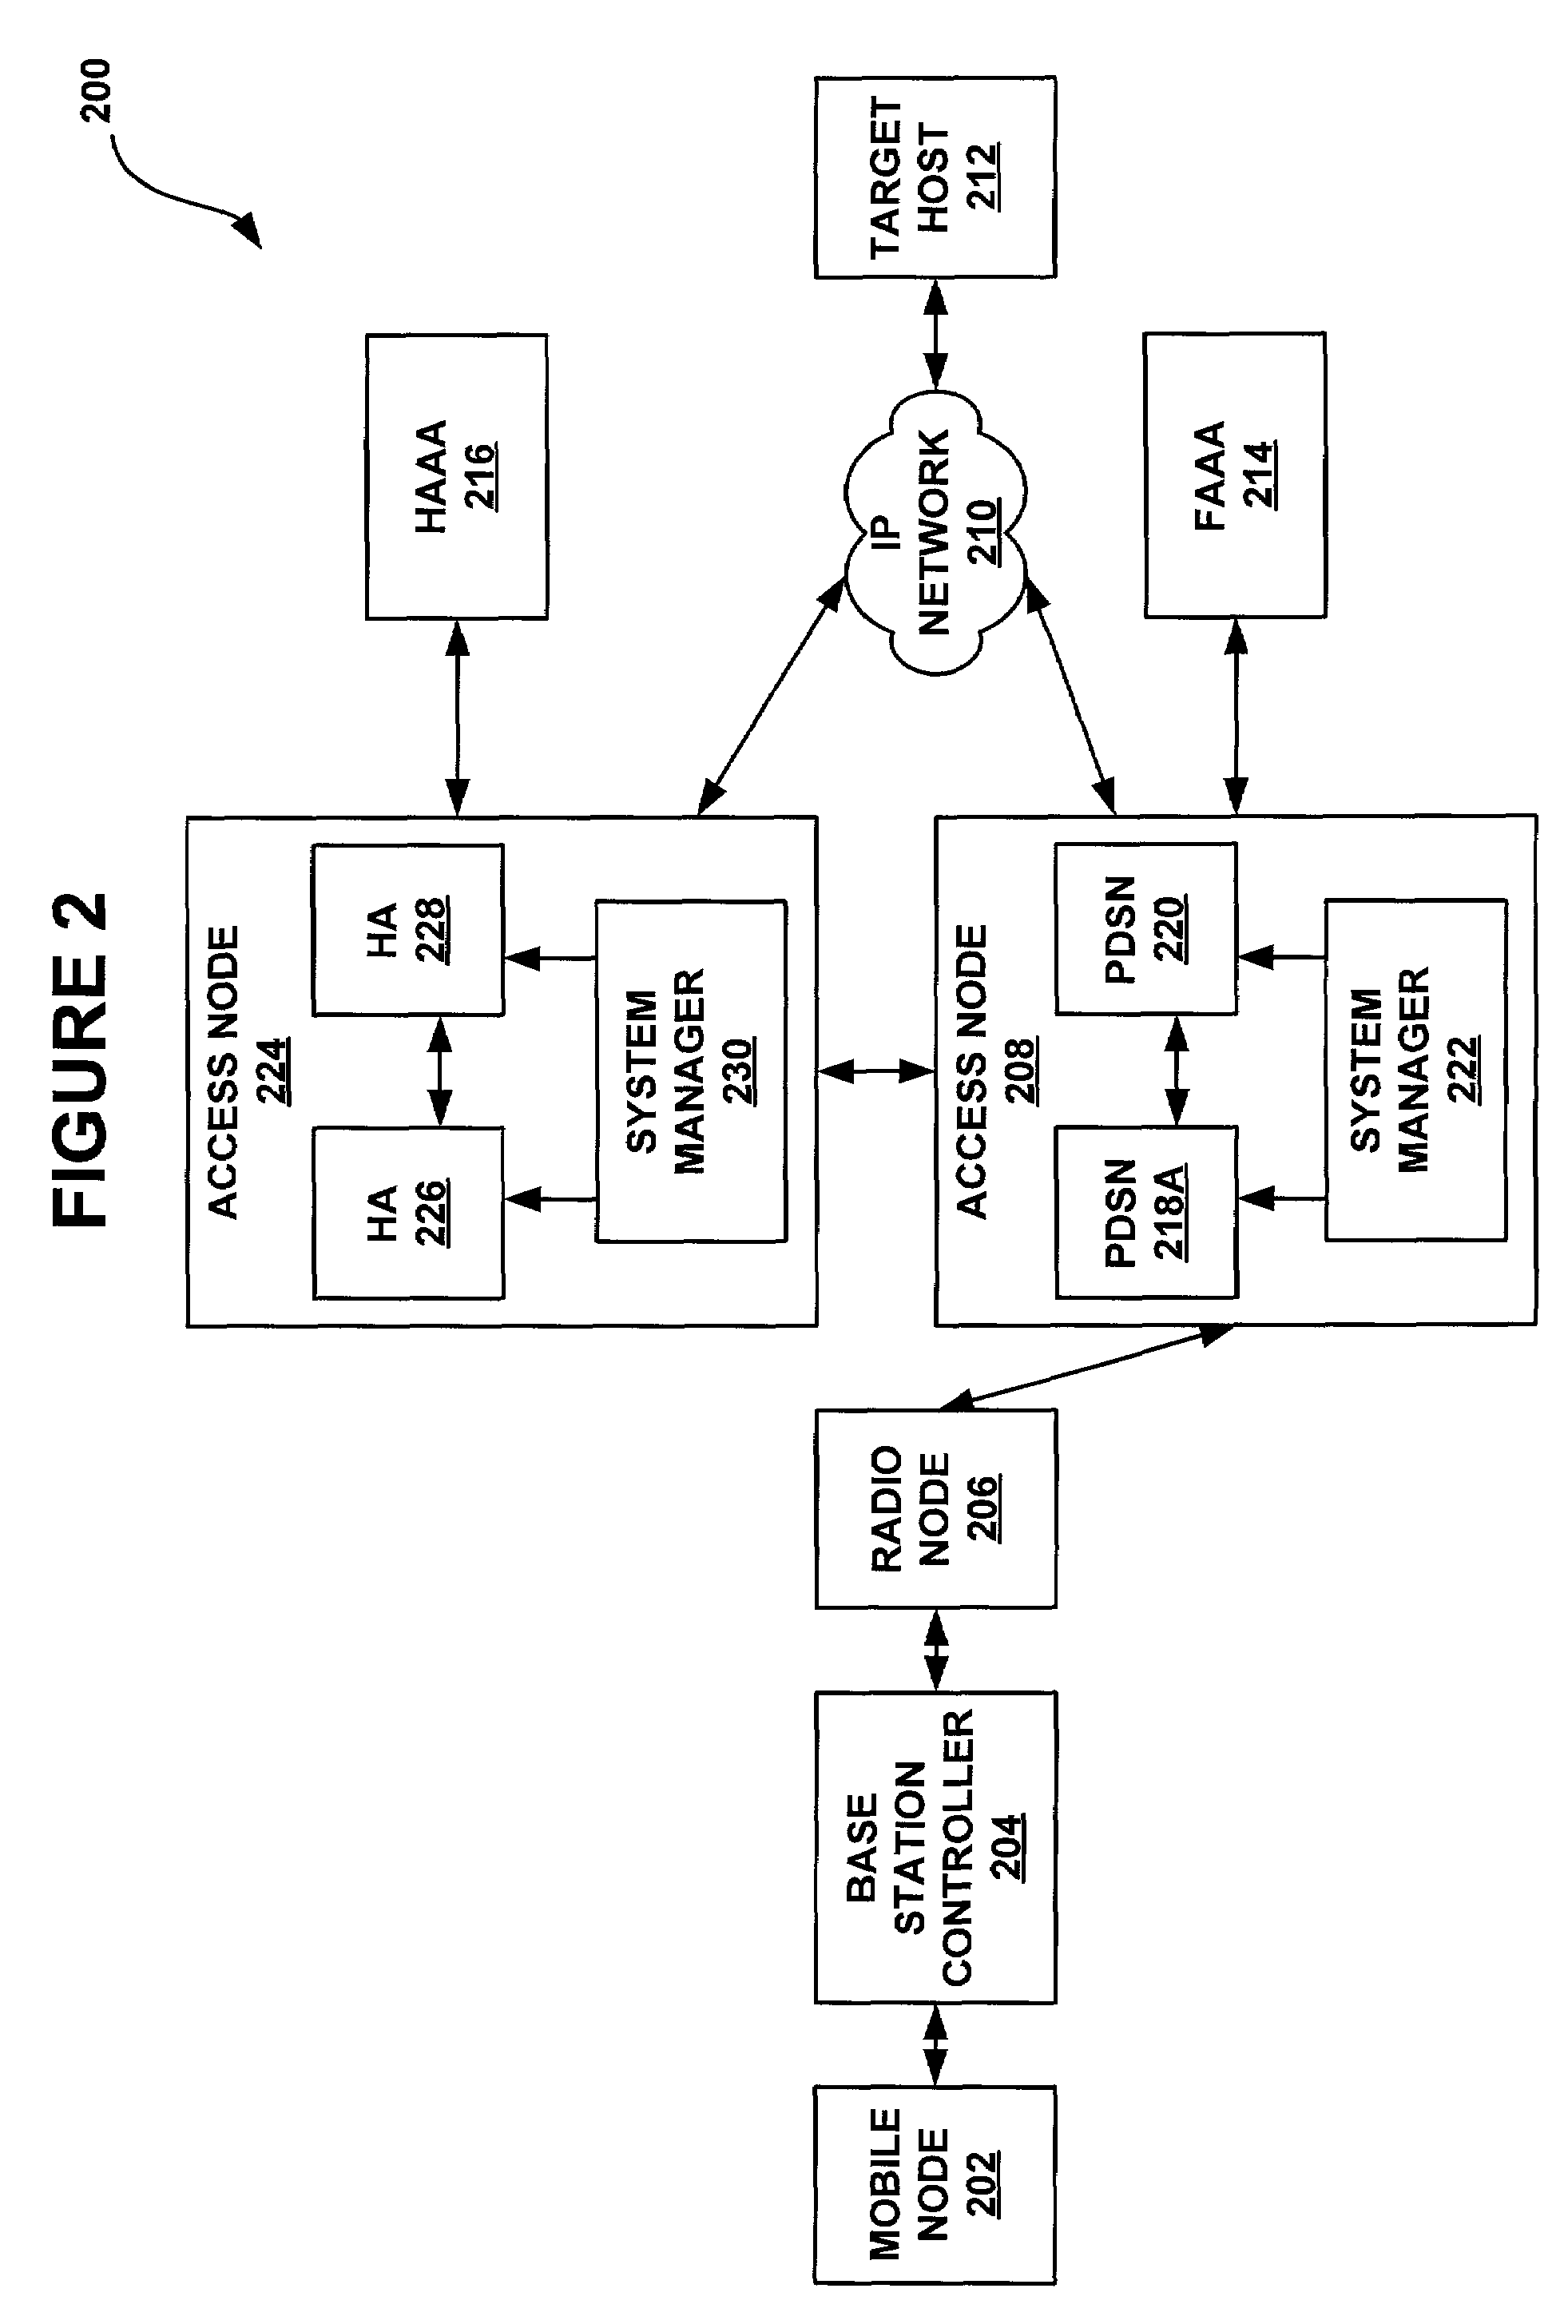 System and method for packet data serving node load balancing and fault tolerance